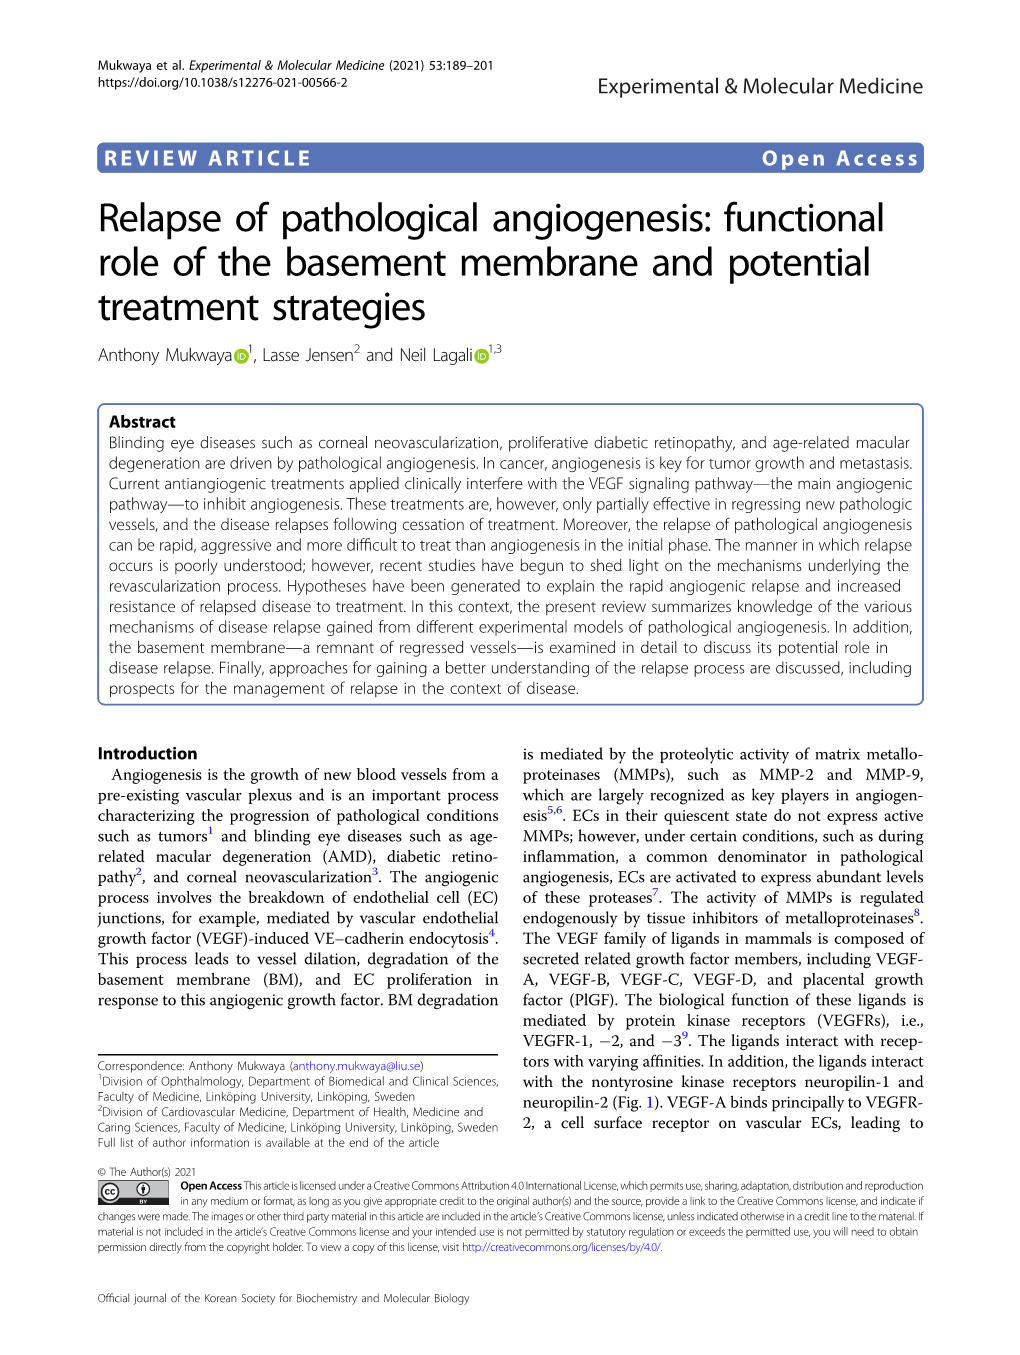 Relapse of Pathological Angiogenesis: Functional Role of the Basement Membrane and Potential Treatment Strategies Anthony Mukwaya 1, Lasse Jensen2 and Neil Lagali 1,3